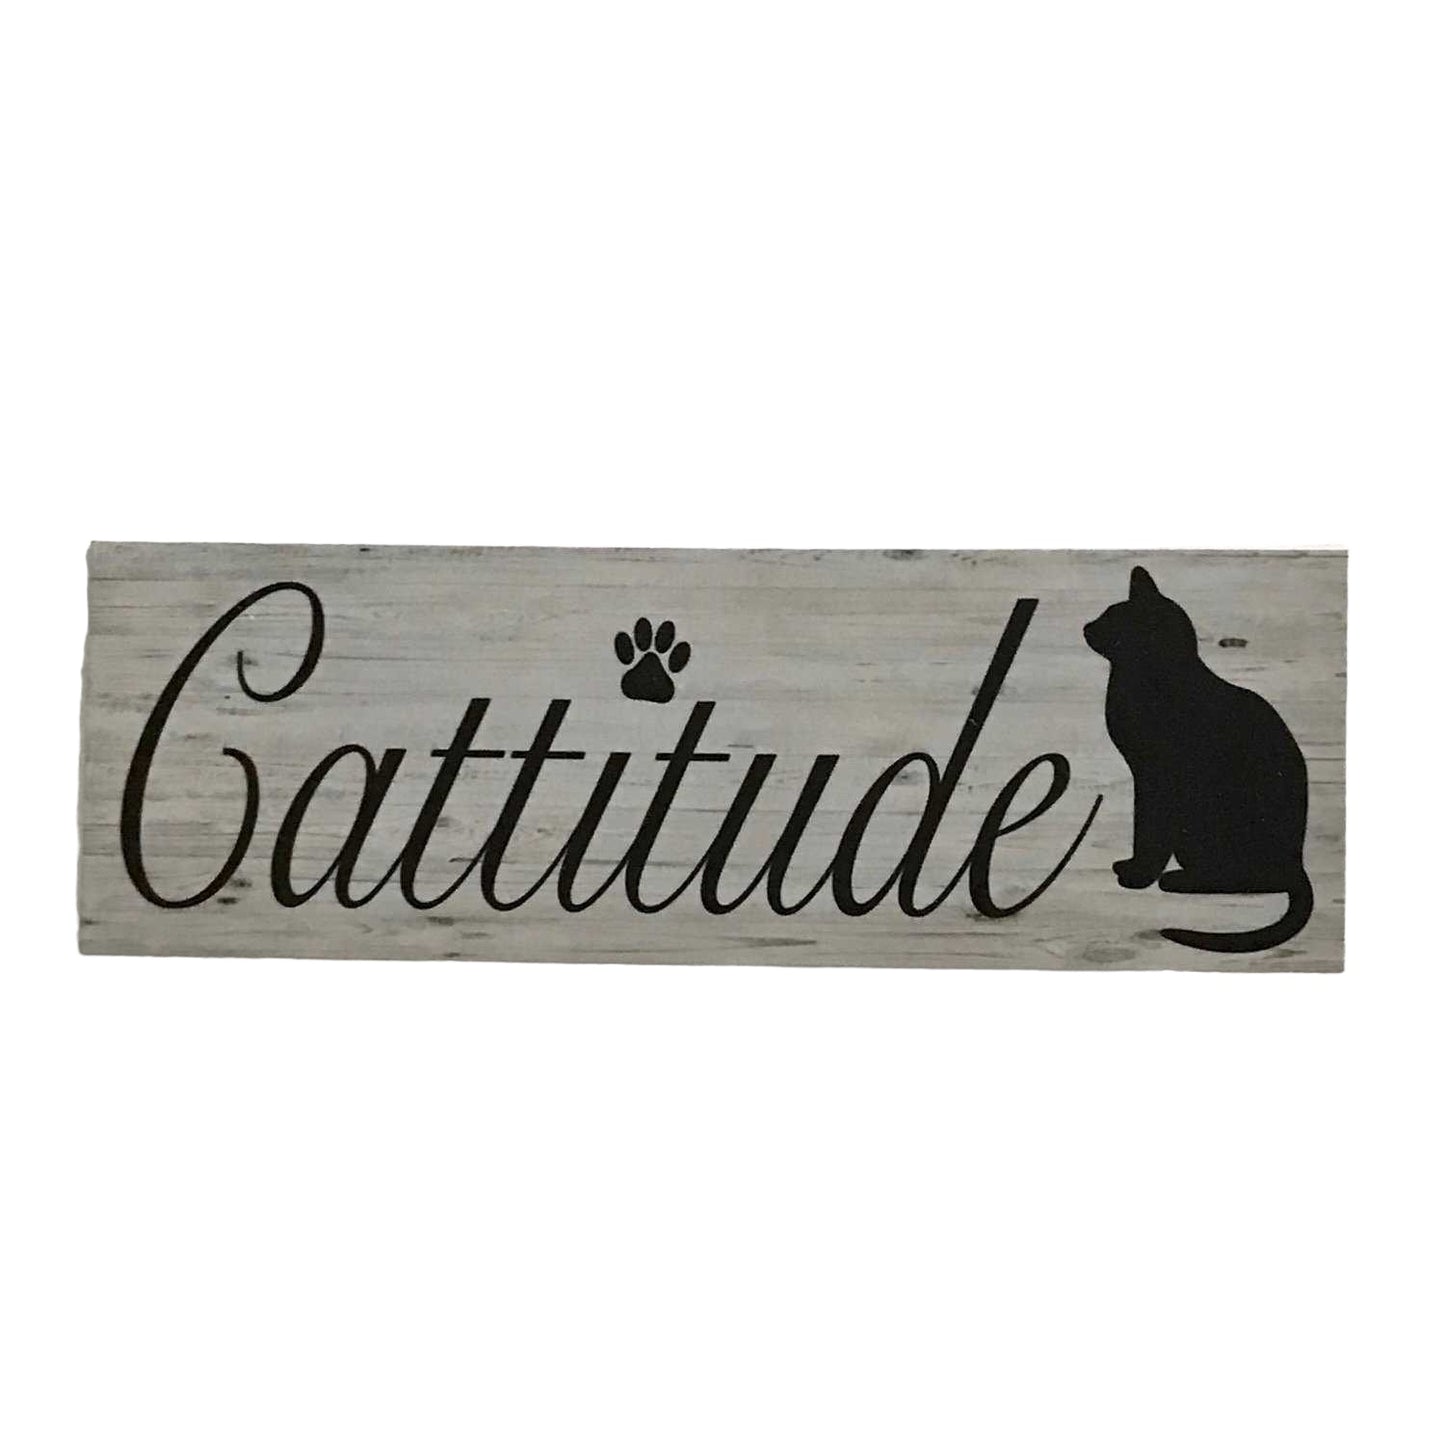 Cattitude Attitude Cat Sign - The Renmy Store Homewares & Gifts 